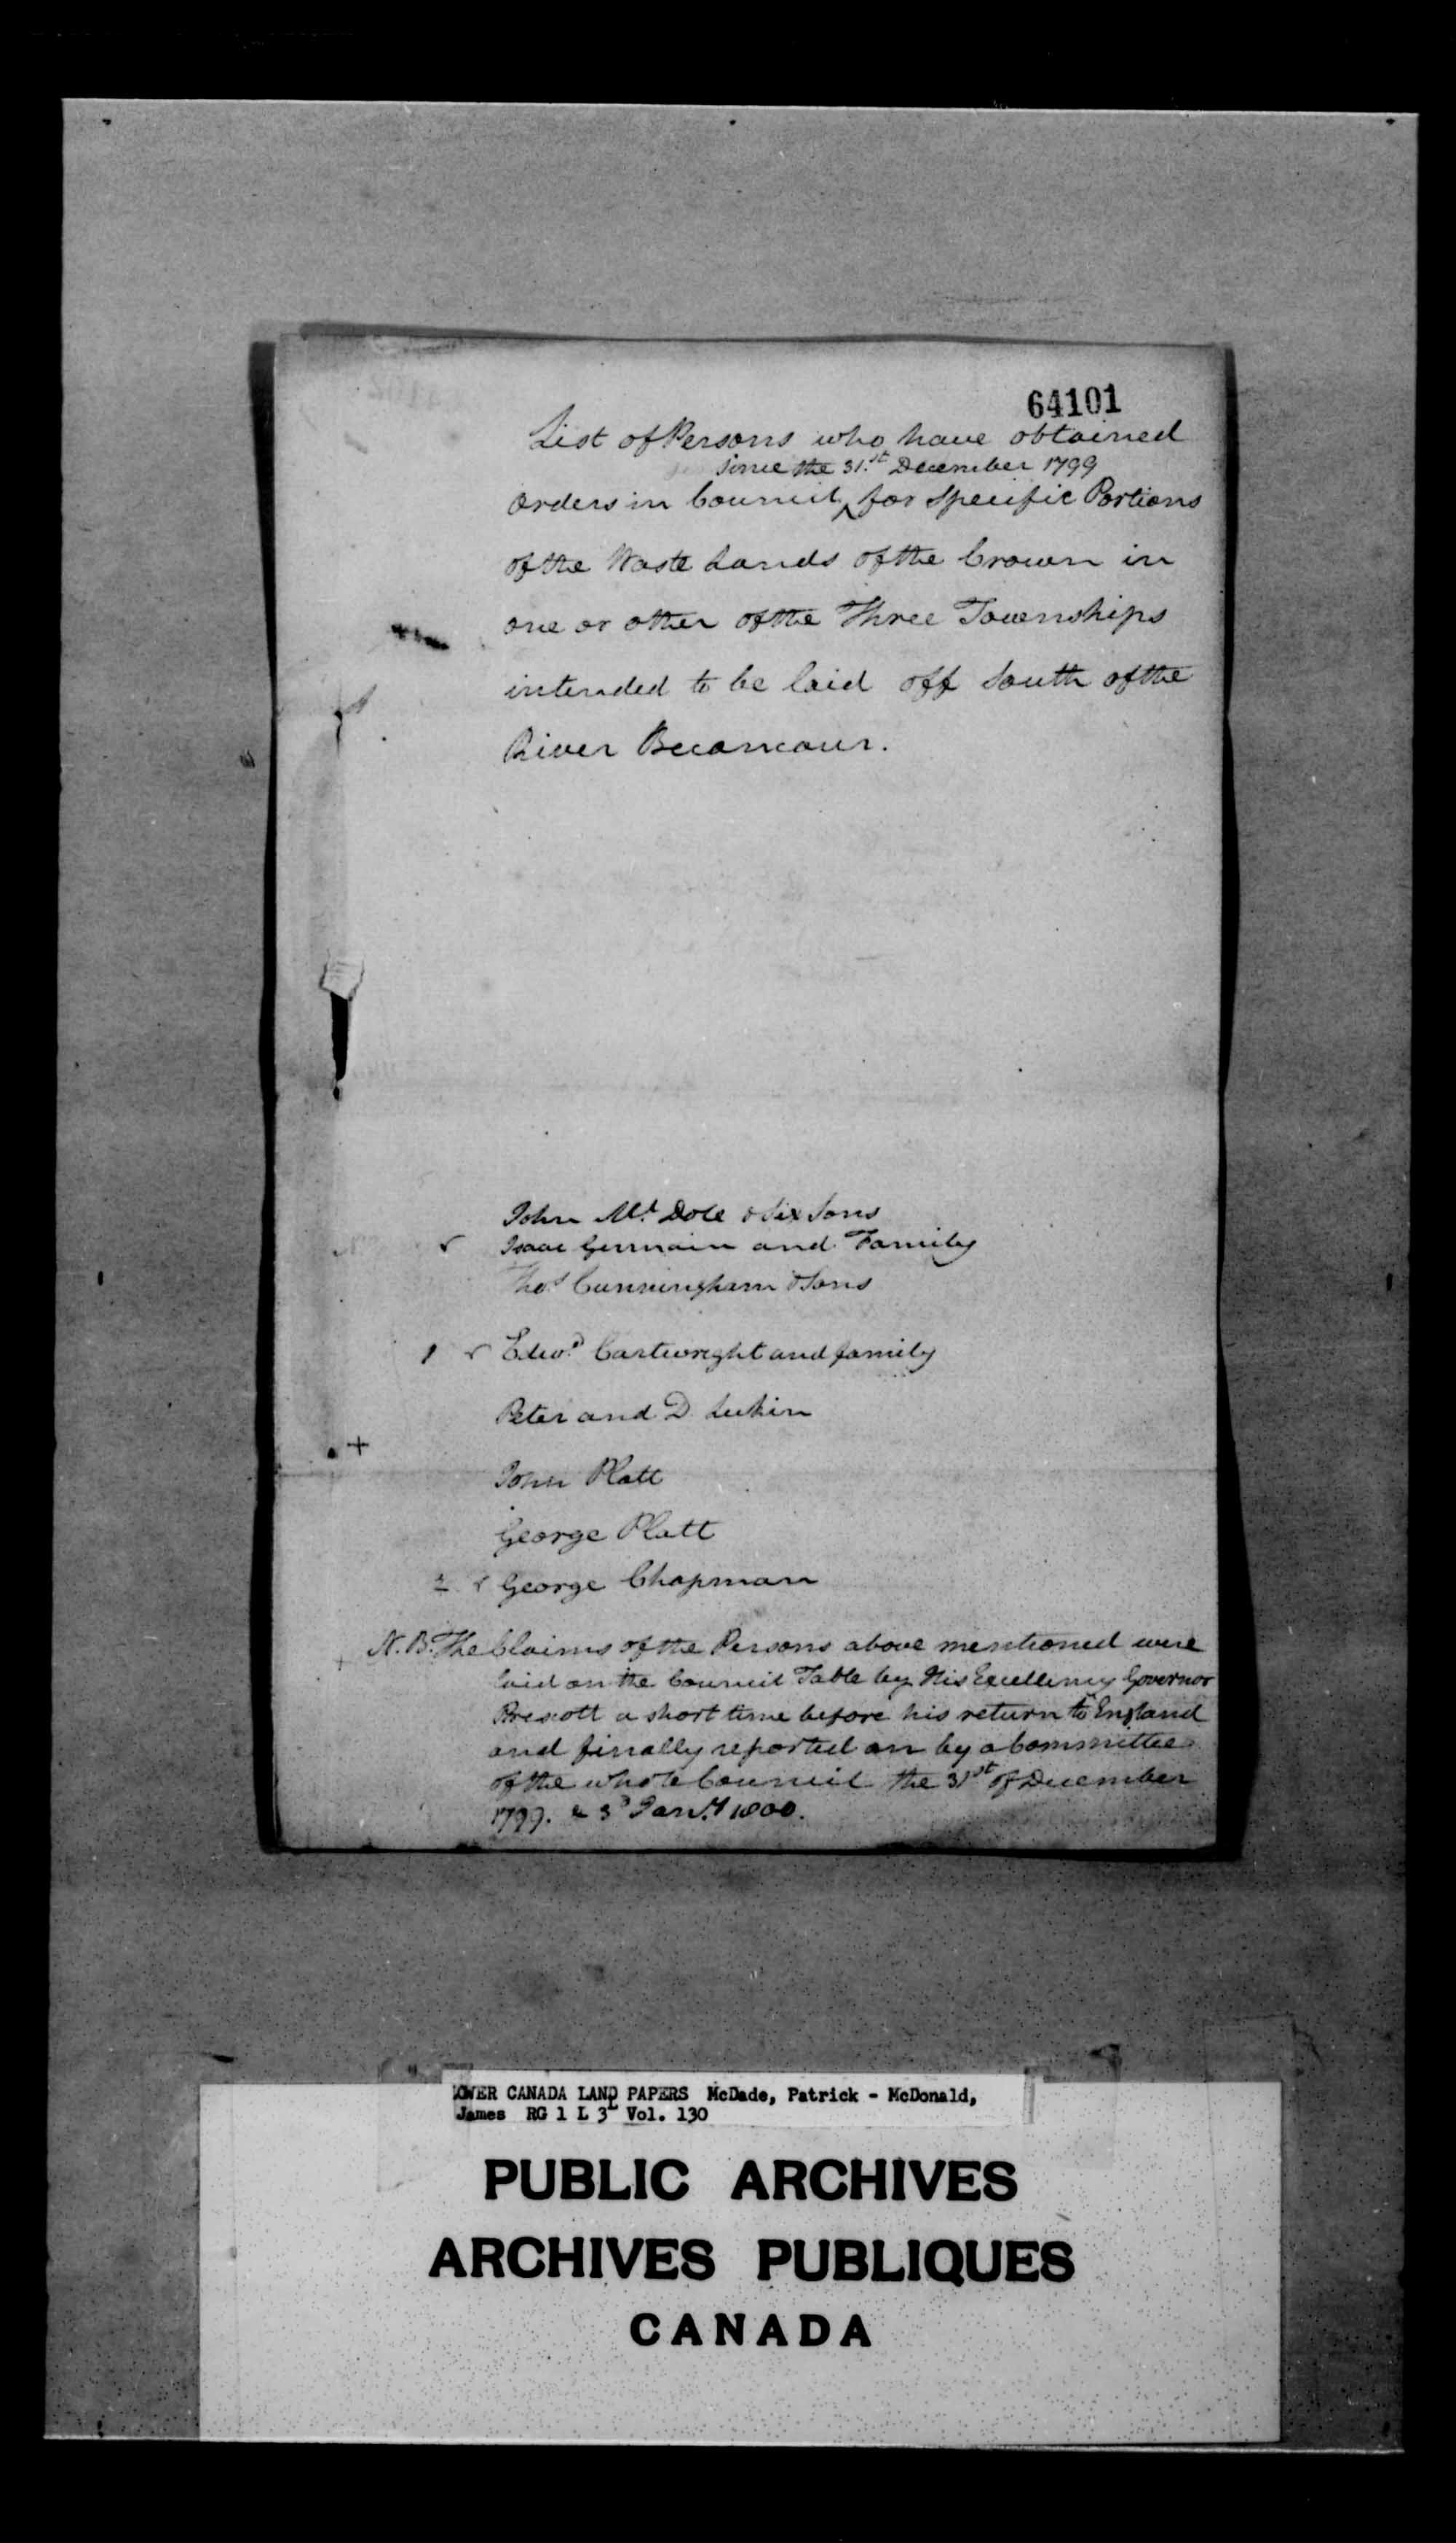 Digitized page of  for Image No.: e008709164